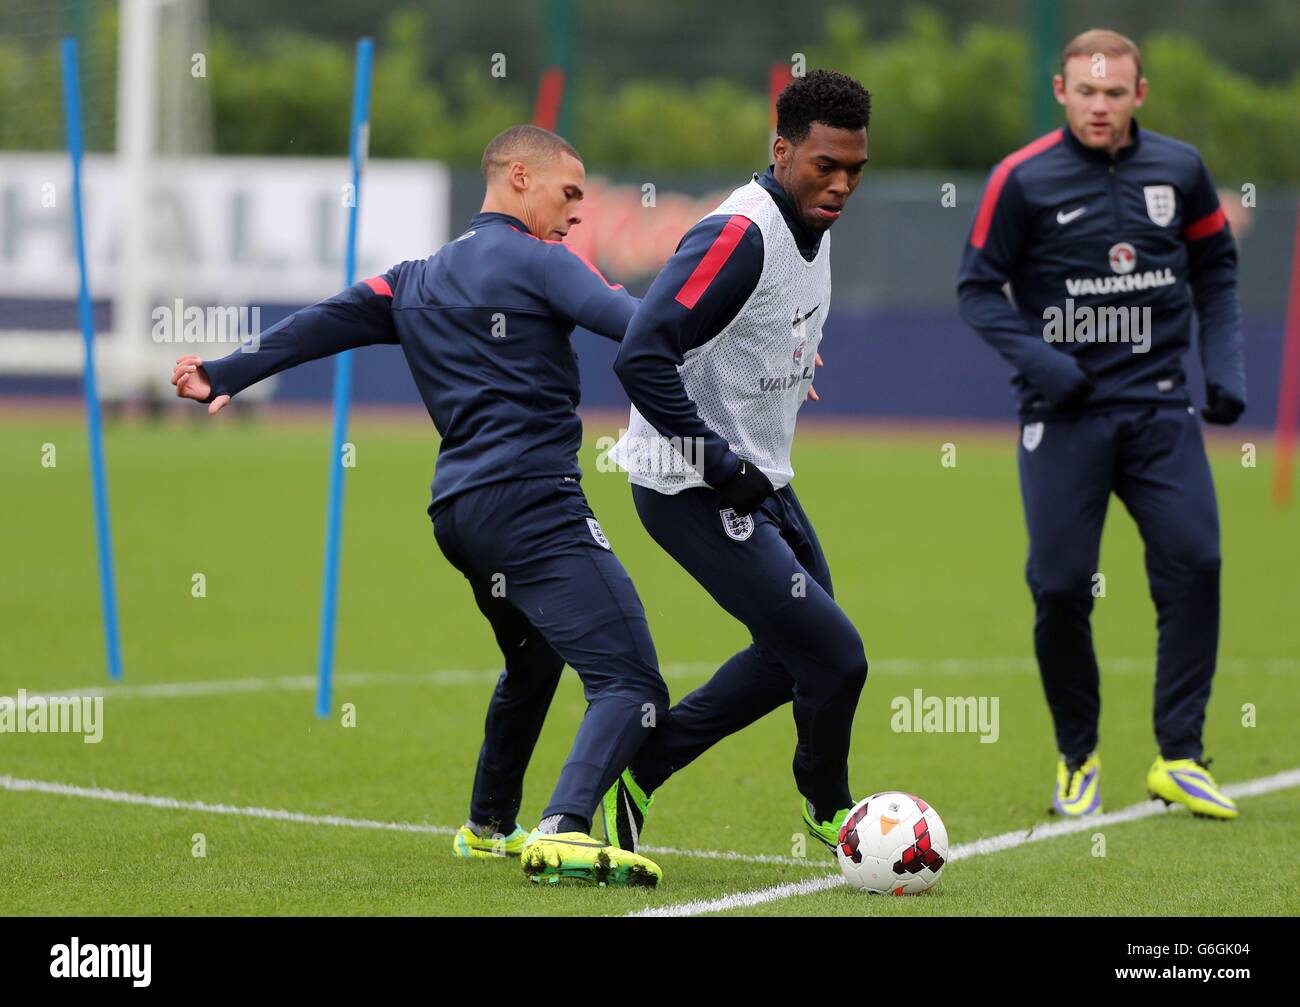 Soccer - FIFA World Cup Qualifying - Group H - England v Poland - England Training Session - London Colney. England's Daniel Sturridge with Keiron Gibbs (left) and Wayne Rooney (right) during the training session at London Colney, Hertfordshire. Stock Photo